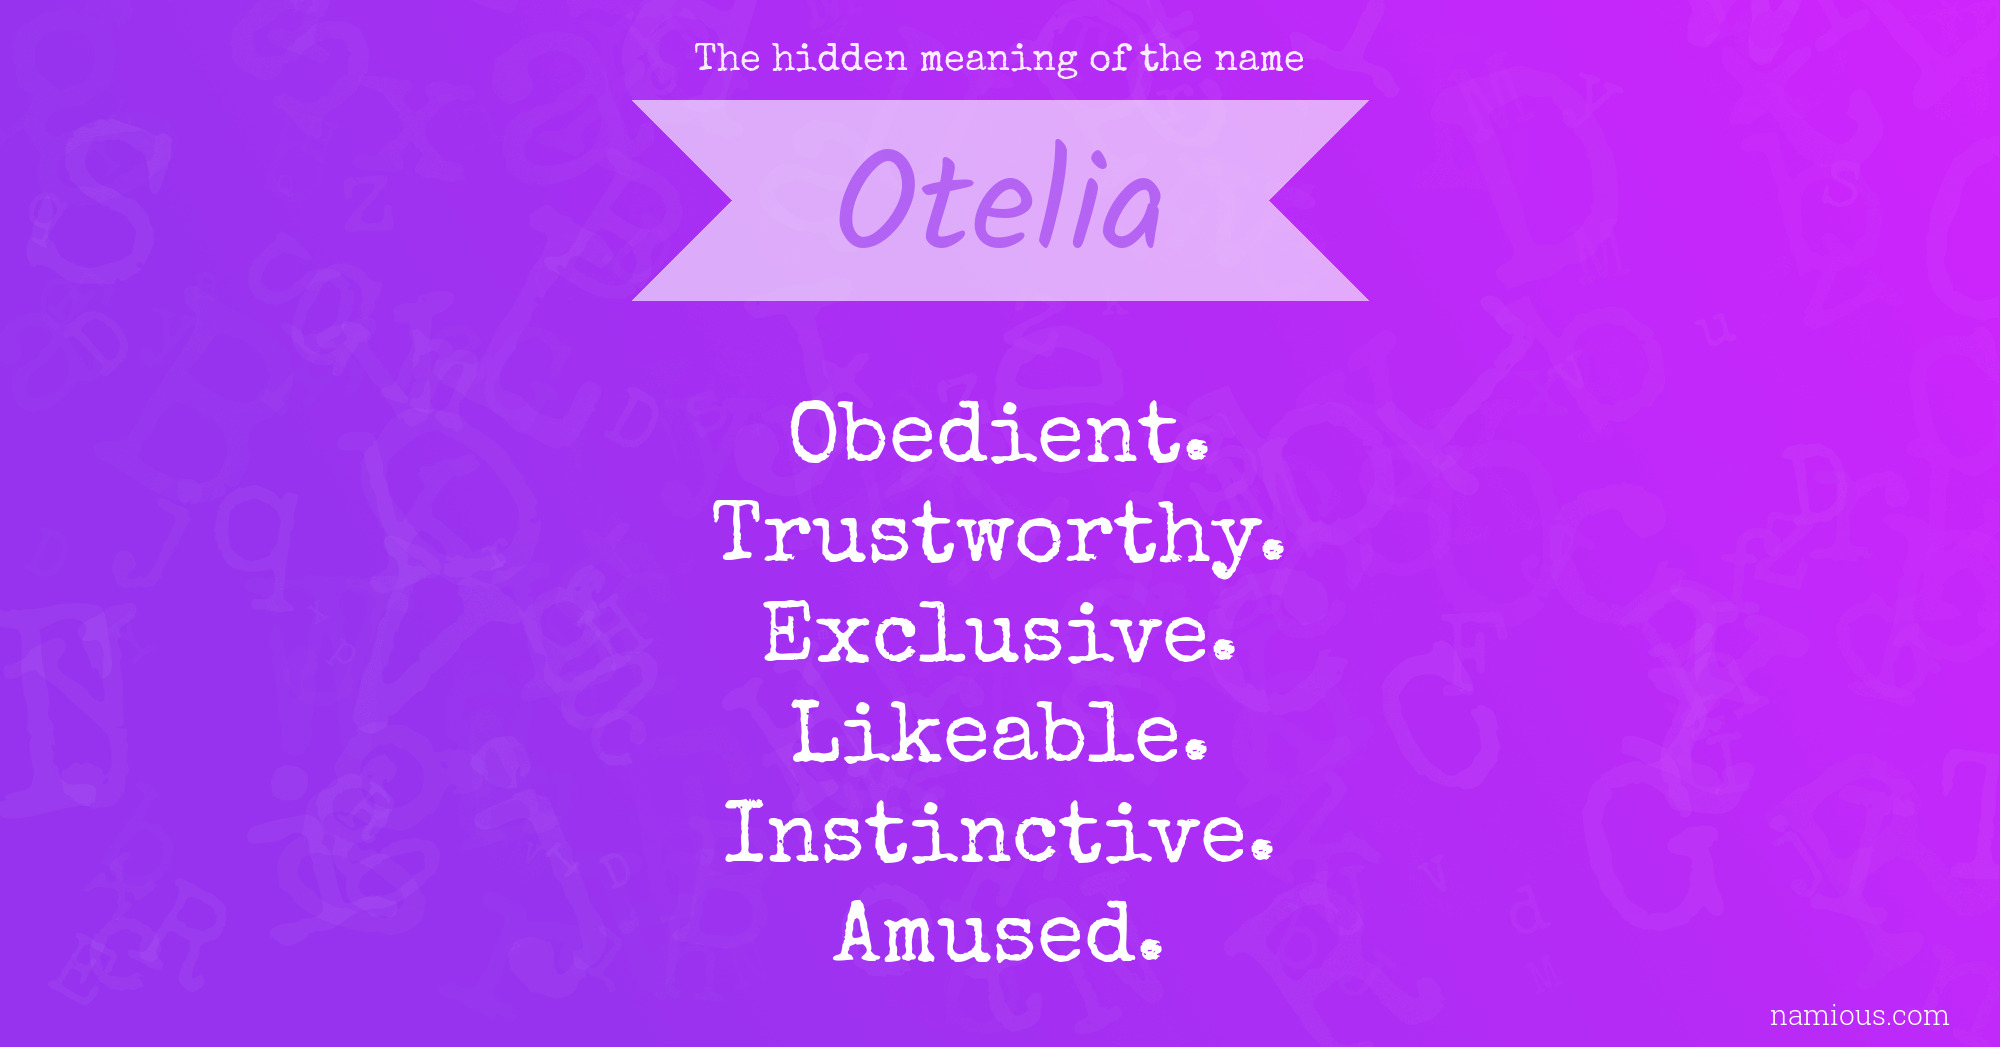 The hidden meaning of the name Otelia